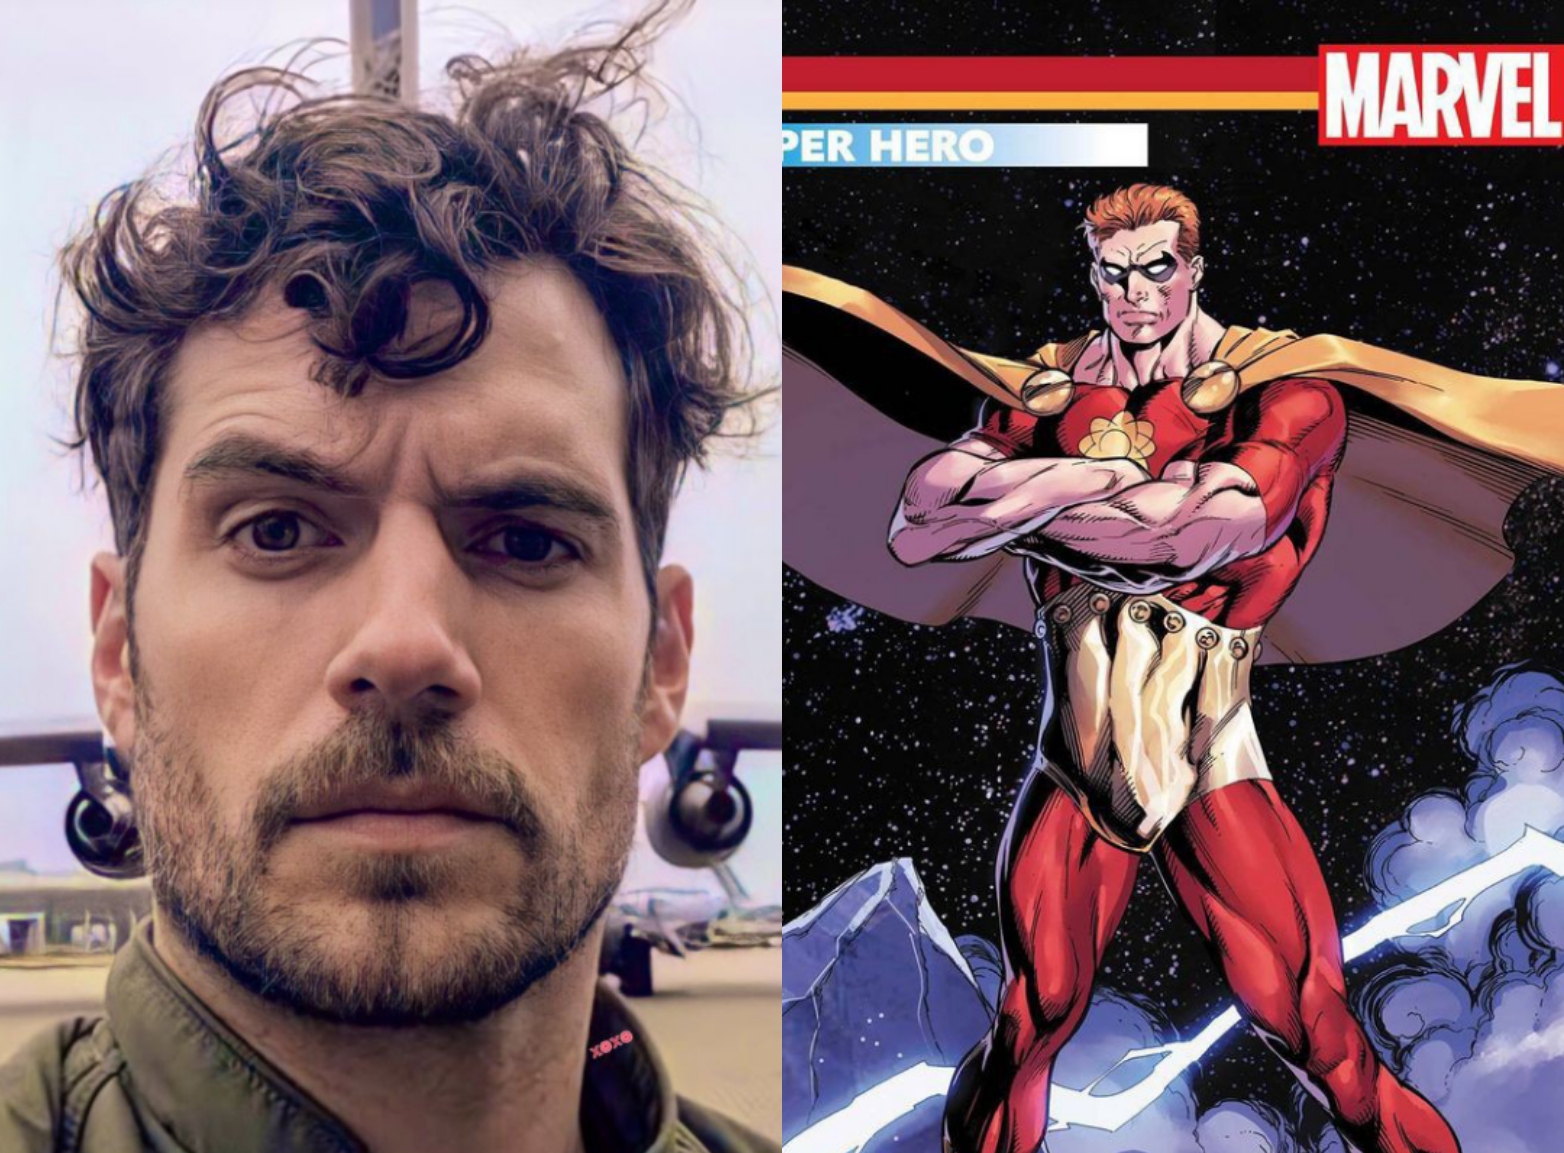 Marvel Fans India - Henry Cavill is imagined as the Marvel Cinematic  Universe's Hyperion in a new piece of fan art following rumors he'll appear  in Loki season 2. #MarvelFansIndia #HenryCavil